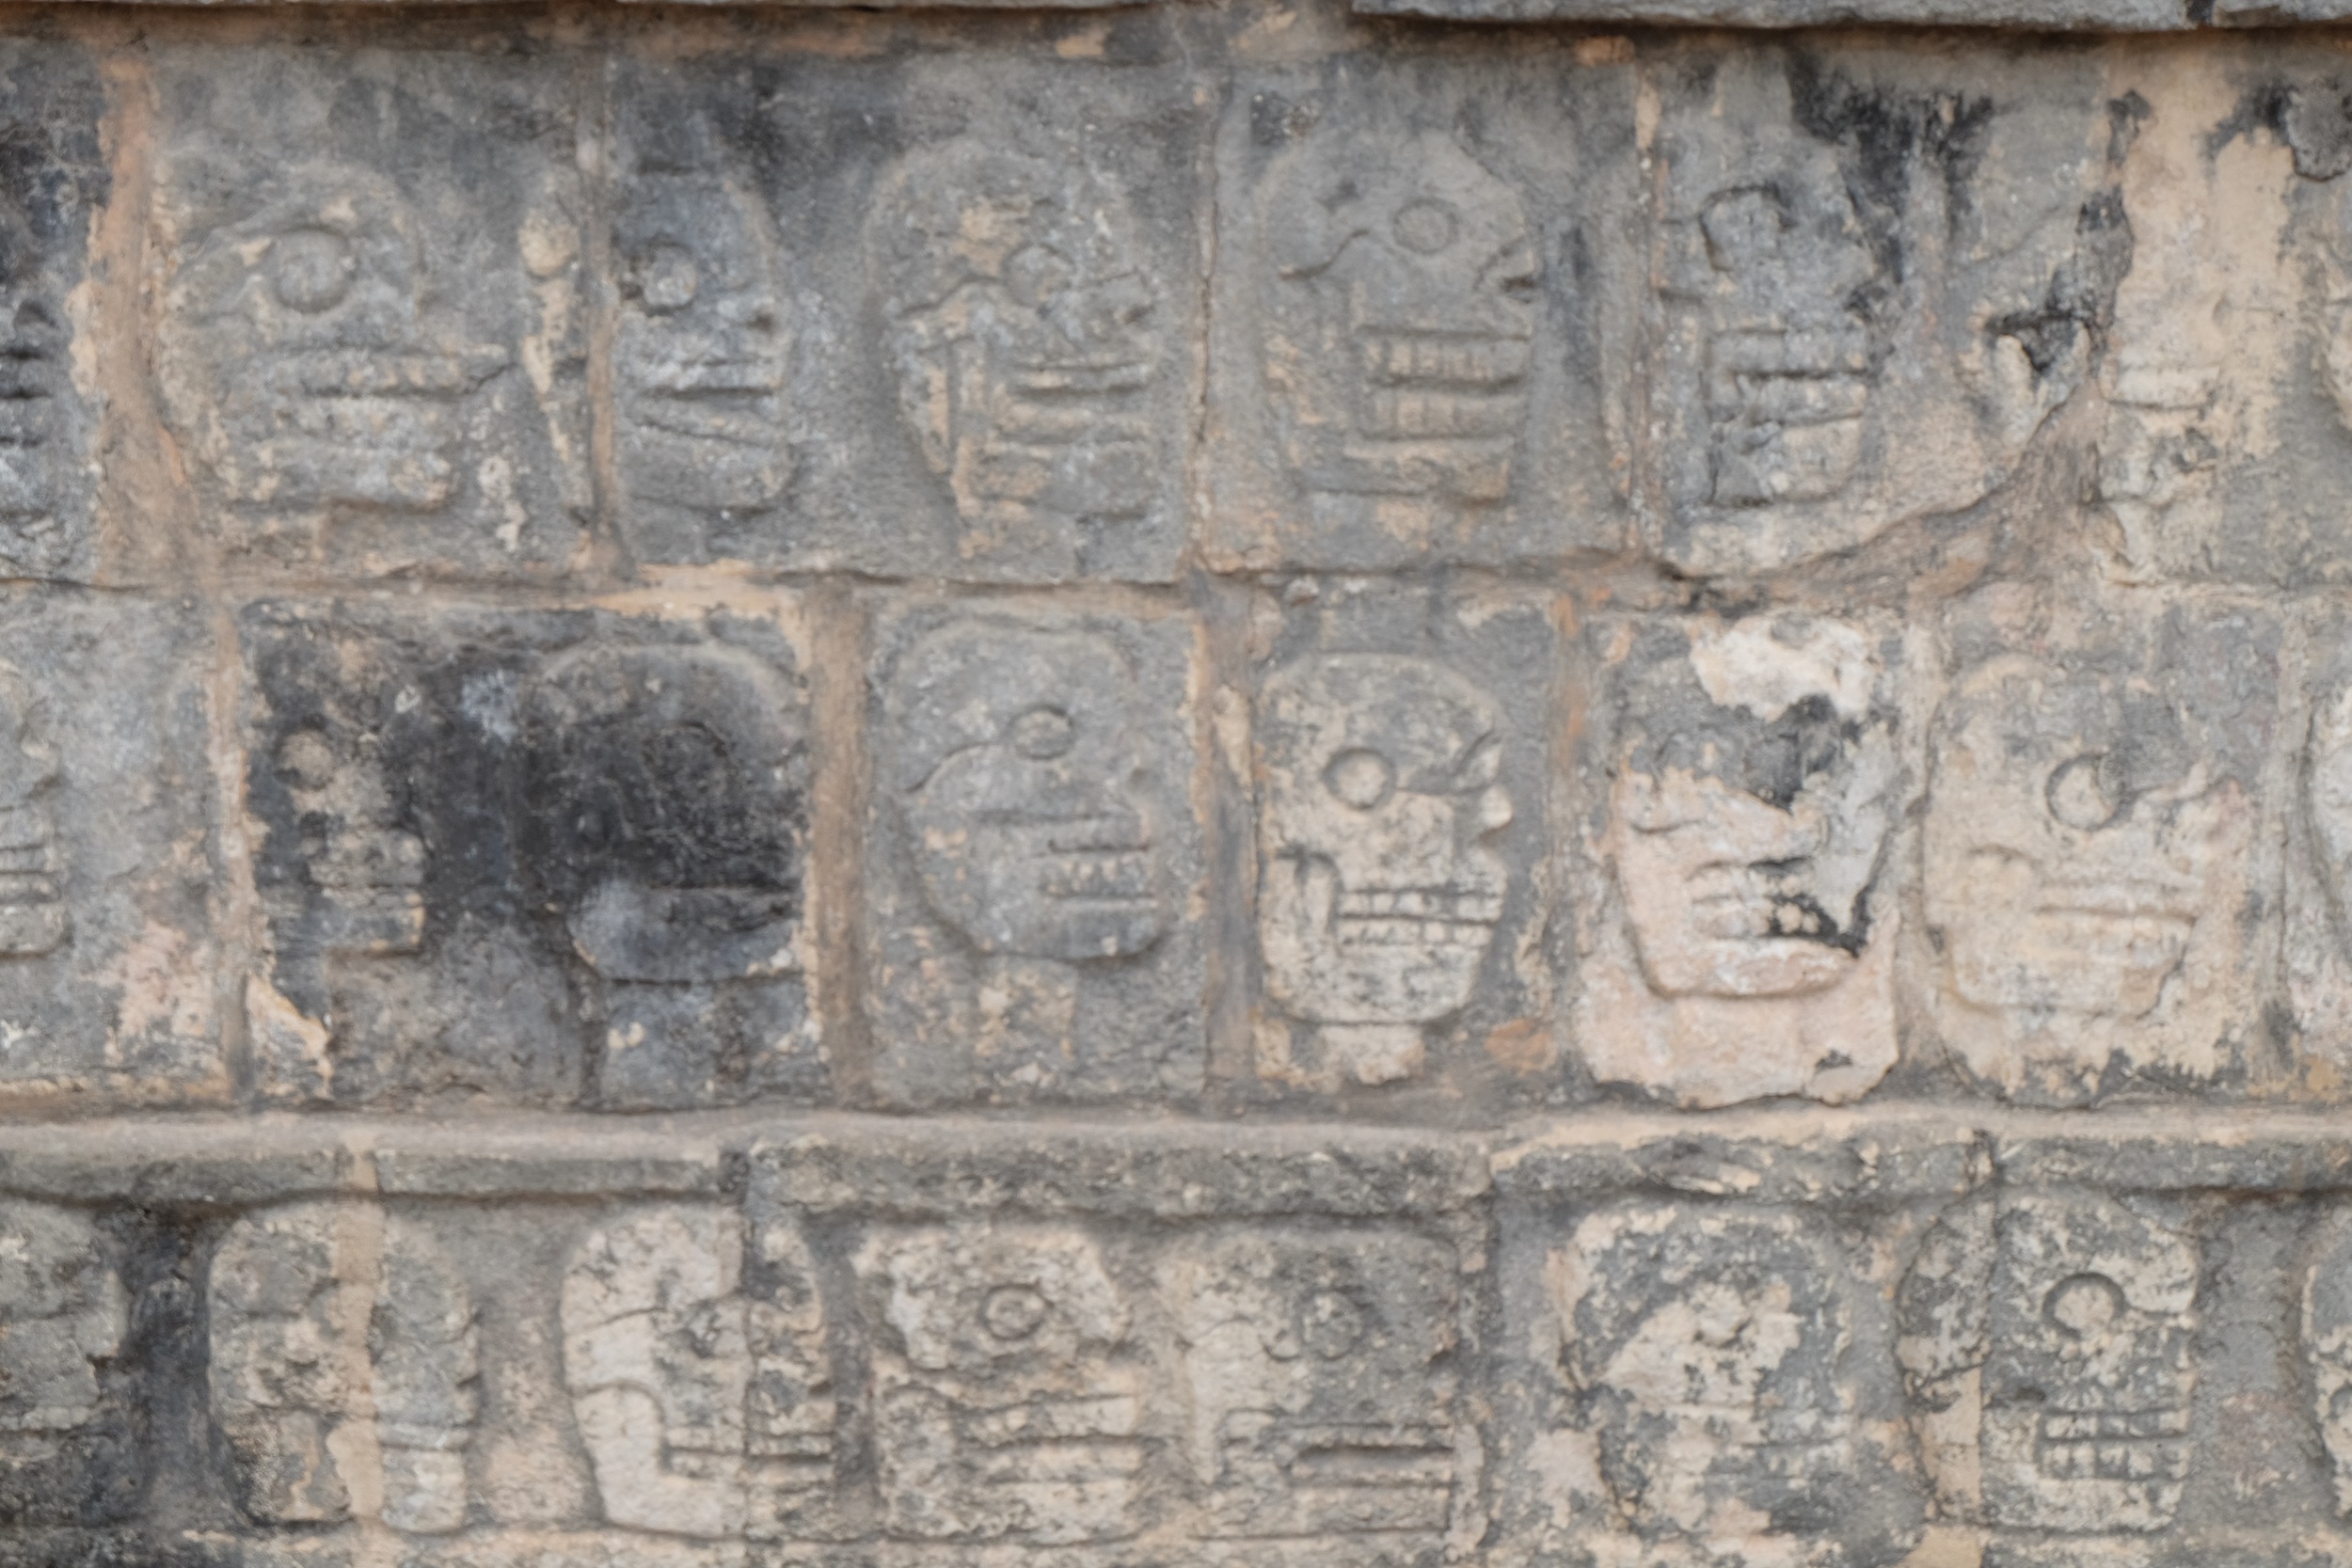 Carvings from Chichen Itza